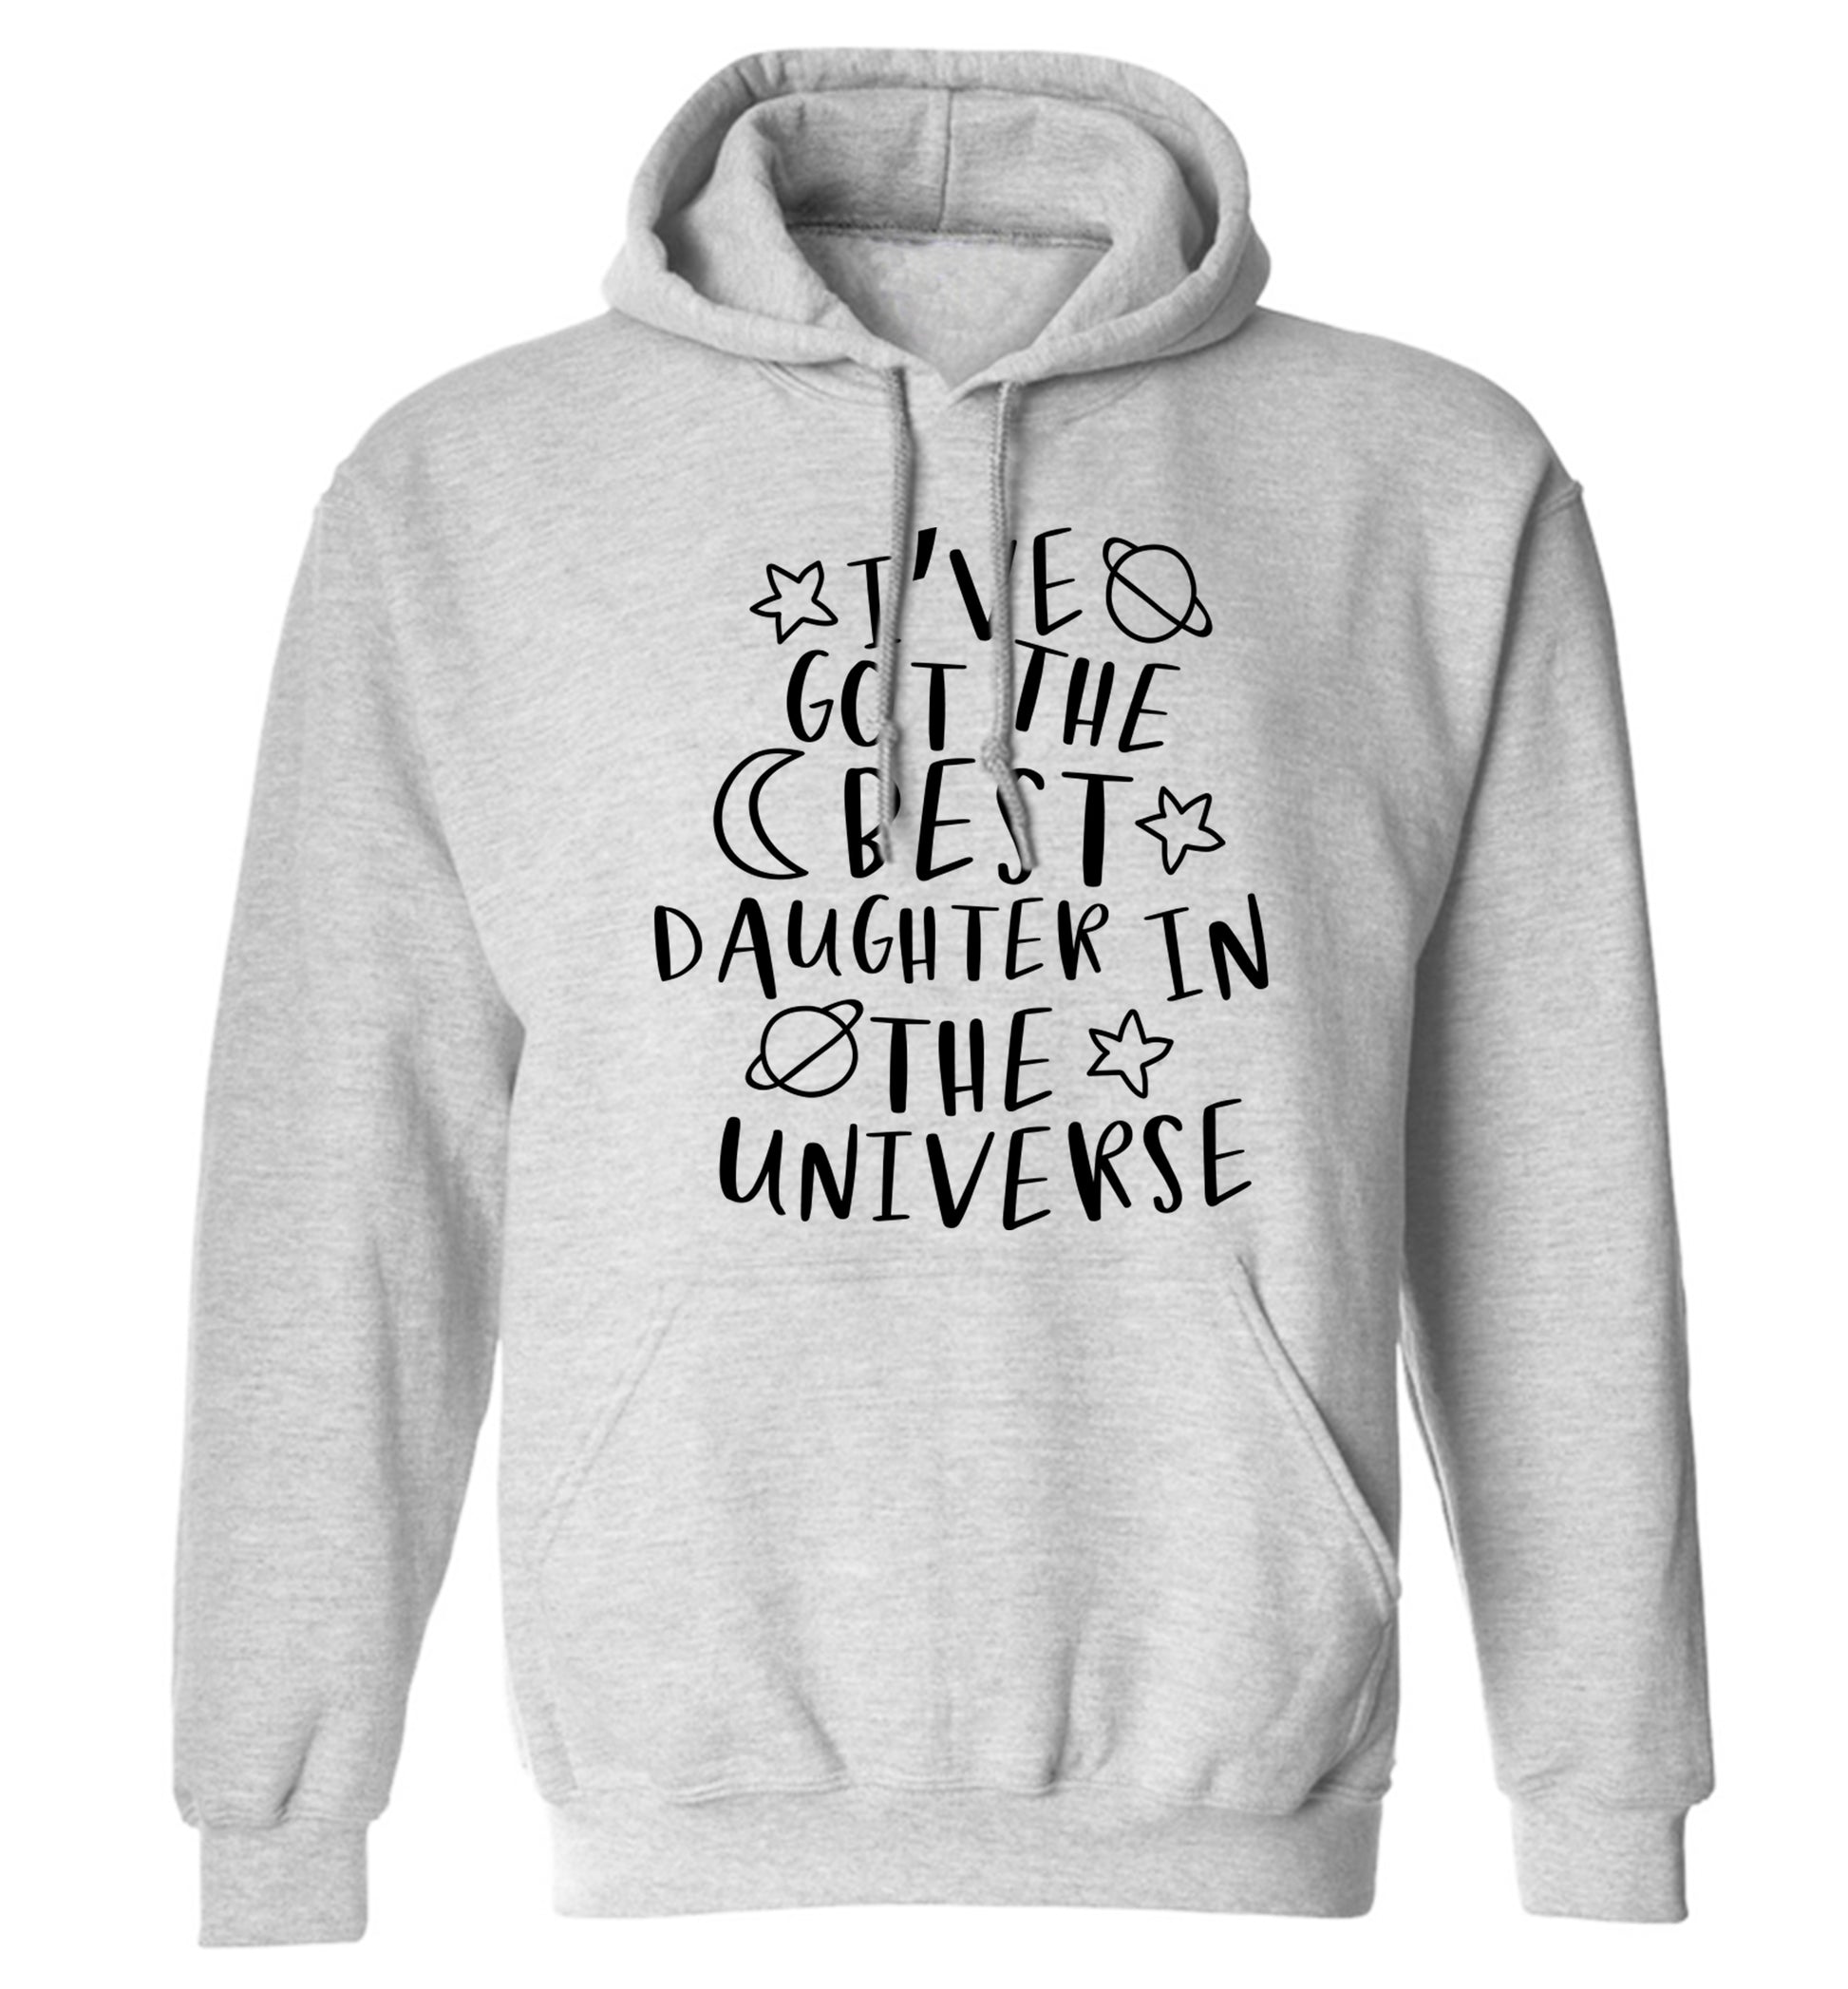 I've got the best daughter in the universe adults unisex grey hoodie 2XL